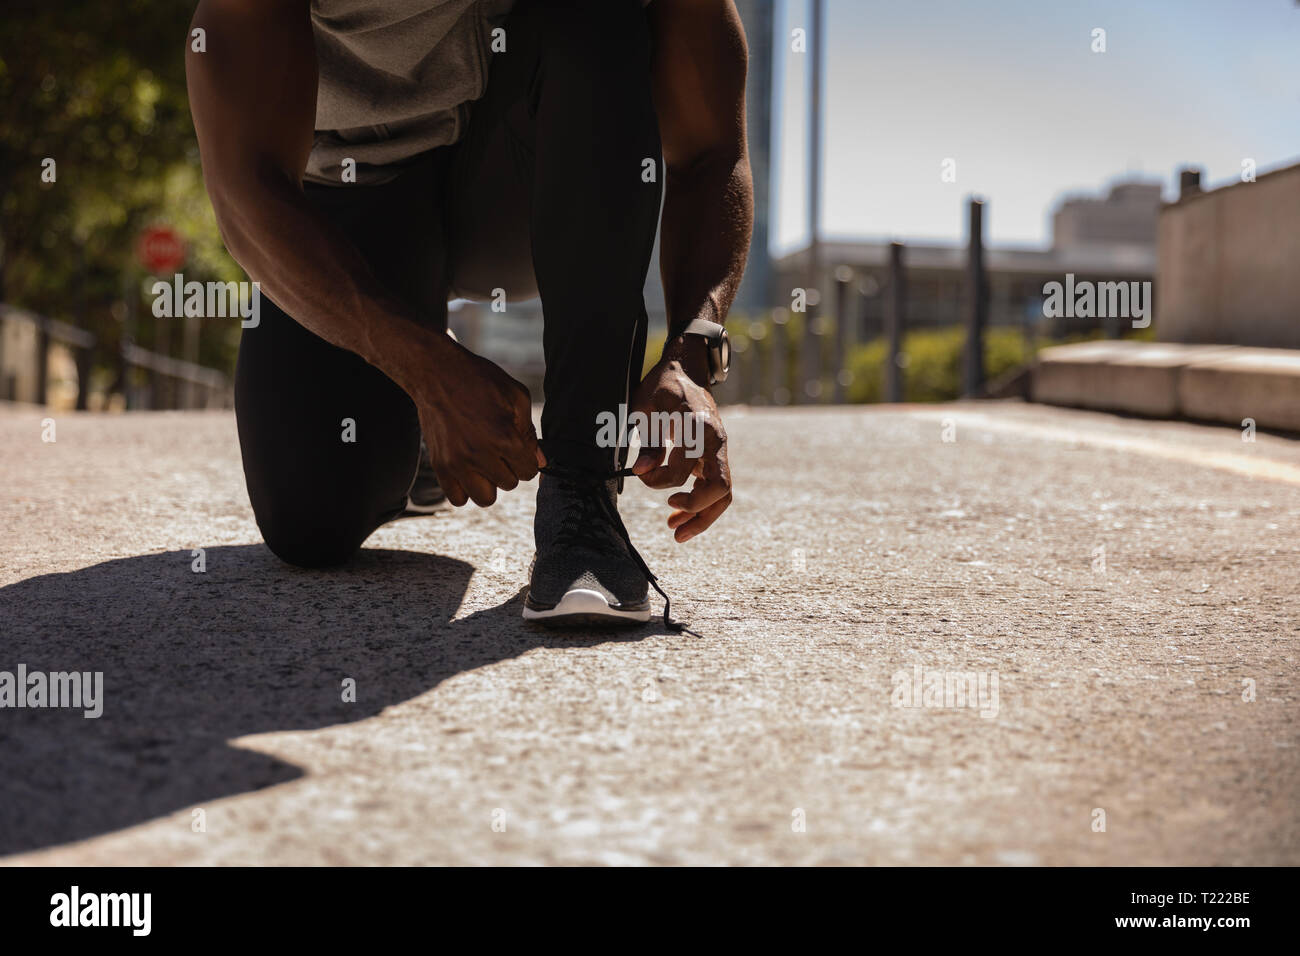 Man tying his shoe lace while crouching at pavement Stock Photo